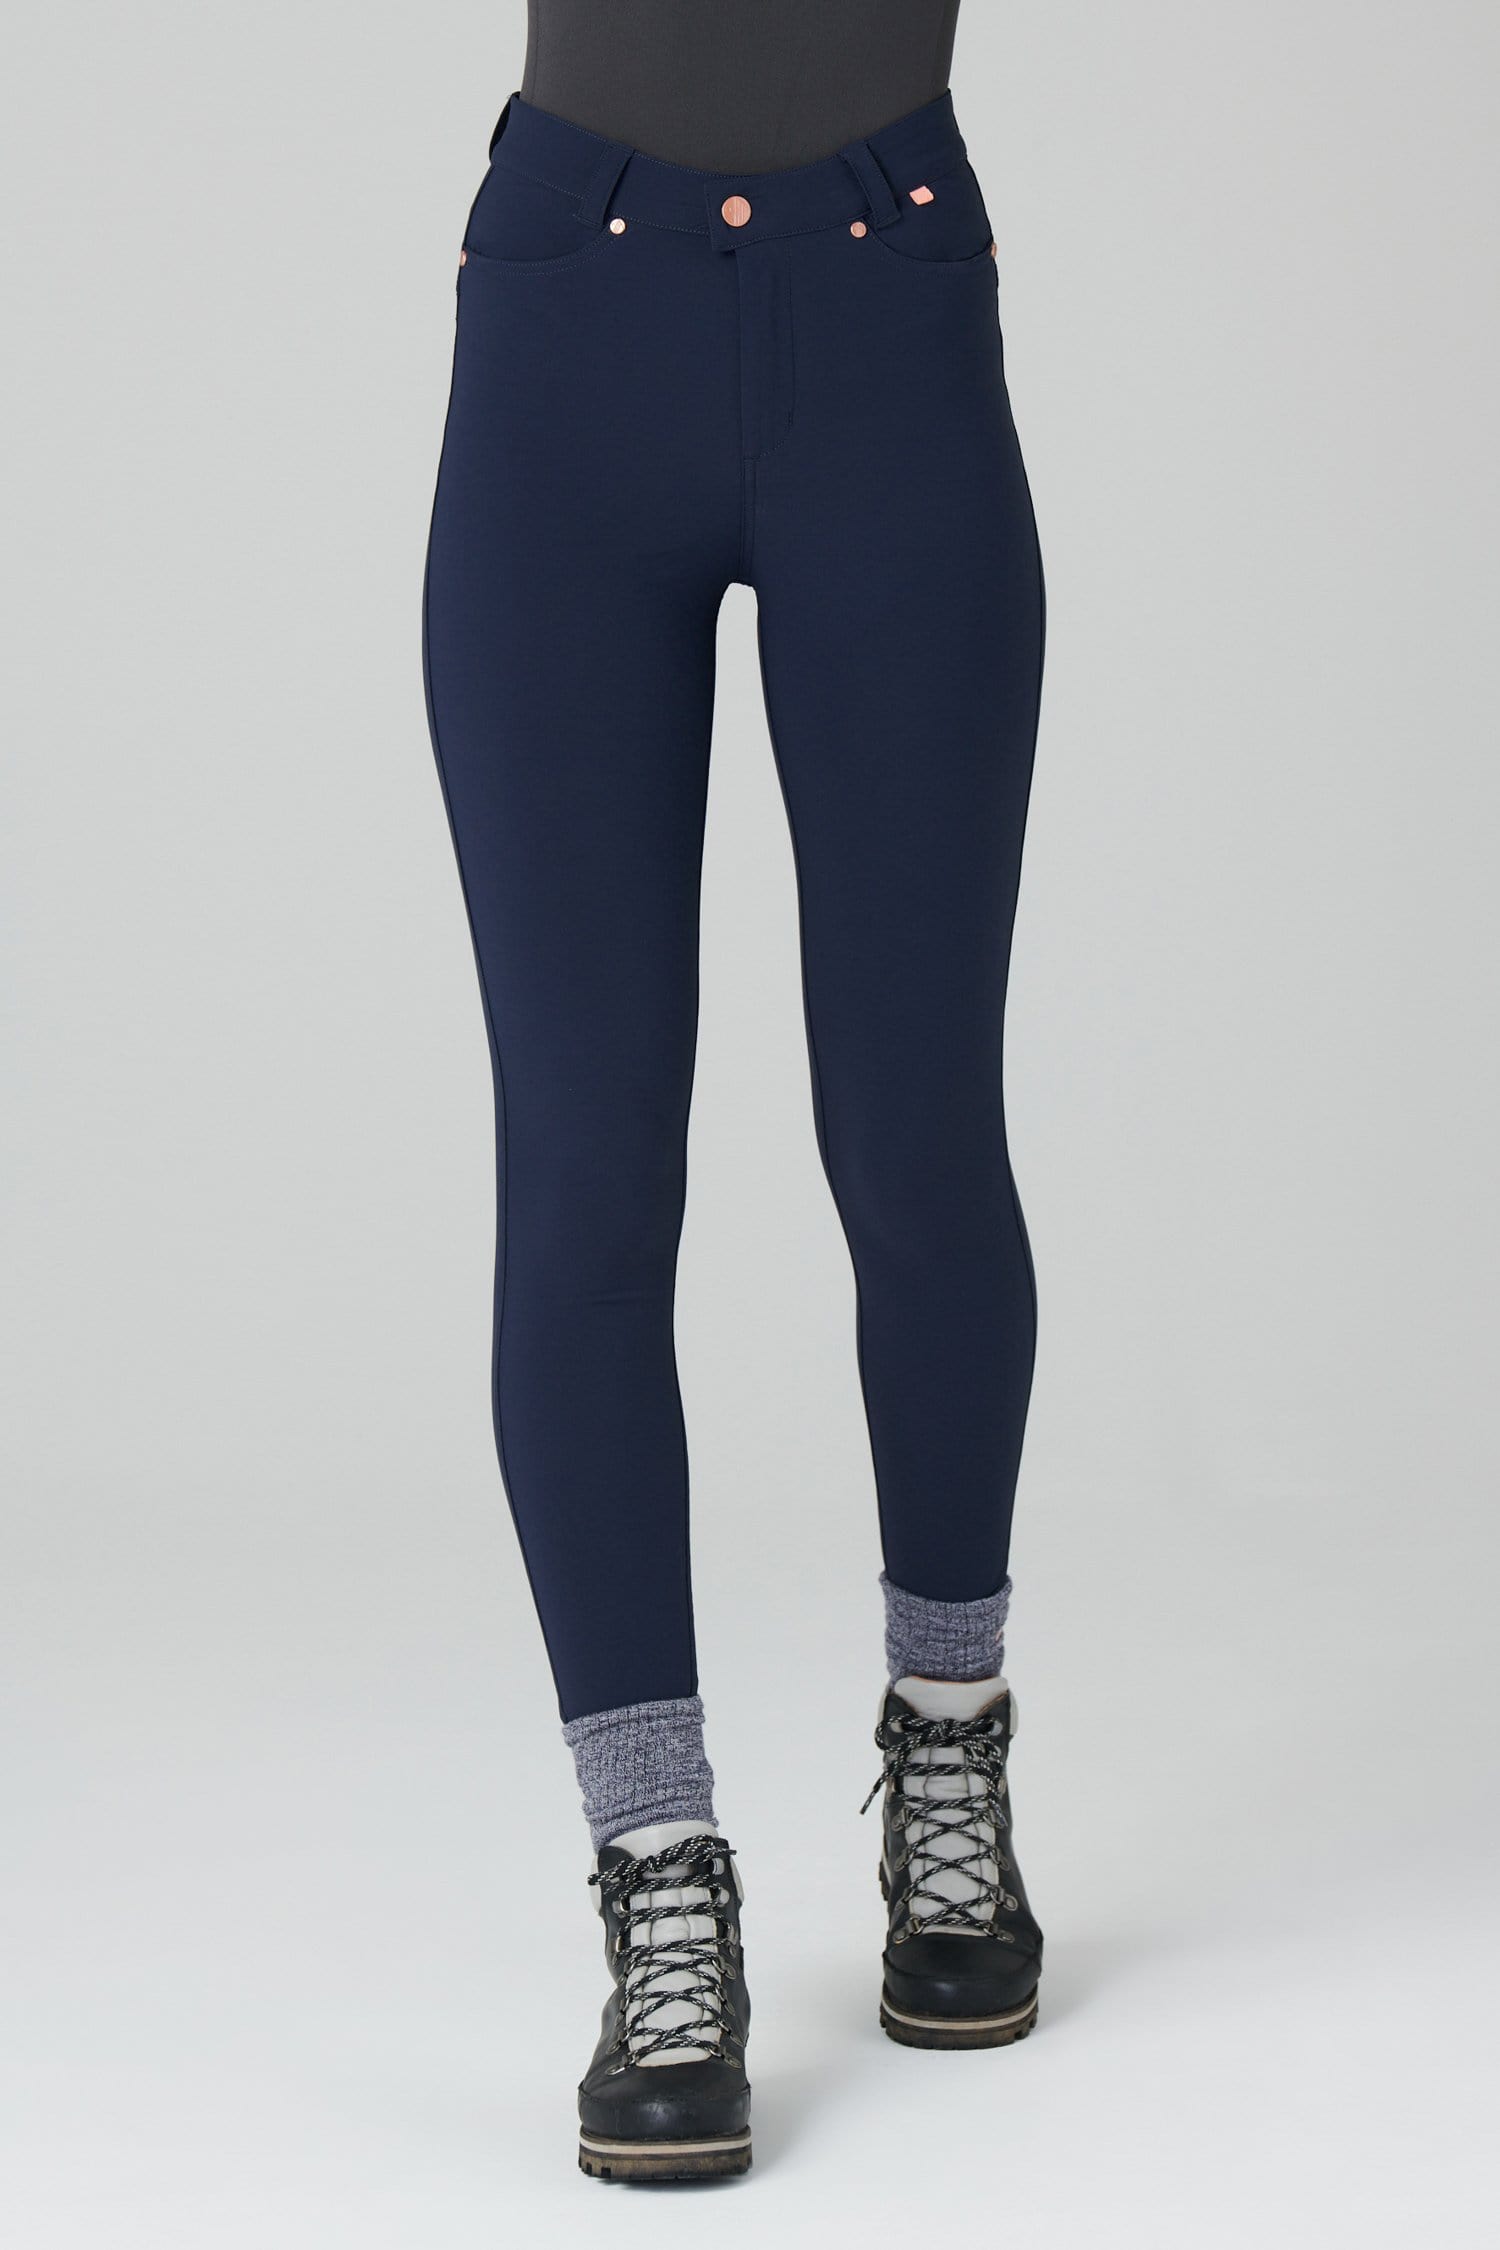 Max Stretch Skinny Outdoor Trousers - Deep Navy - 32p / Uk14 - Womens - Acai Outdoorwear